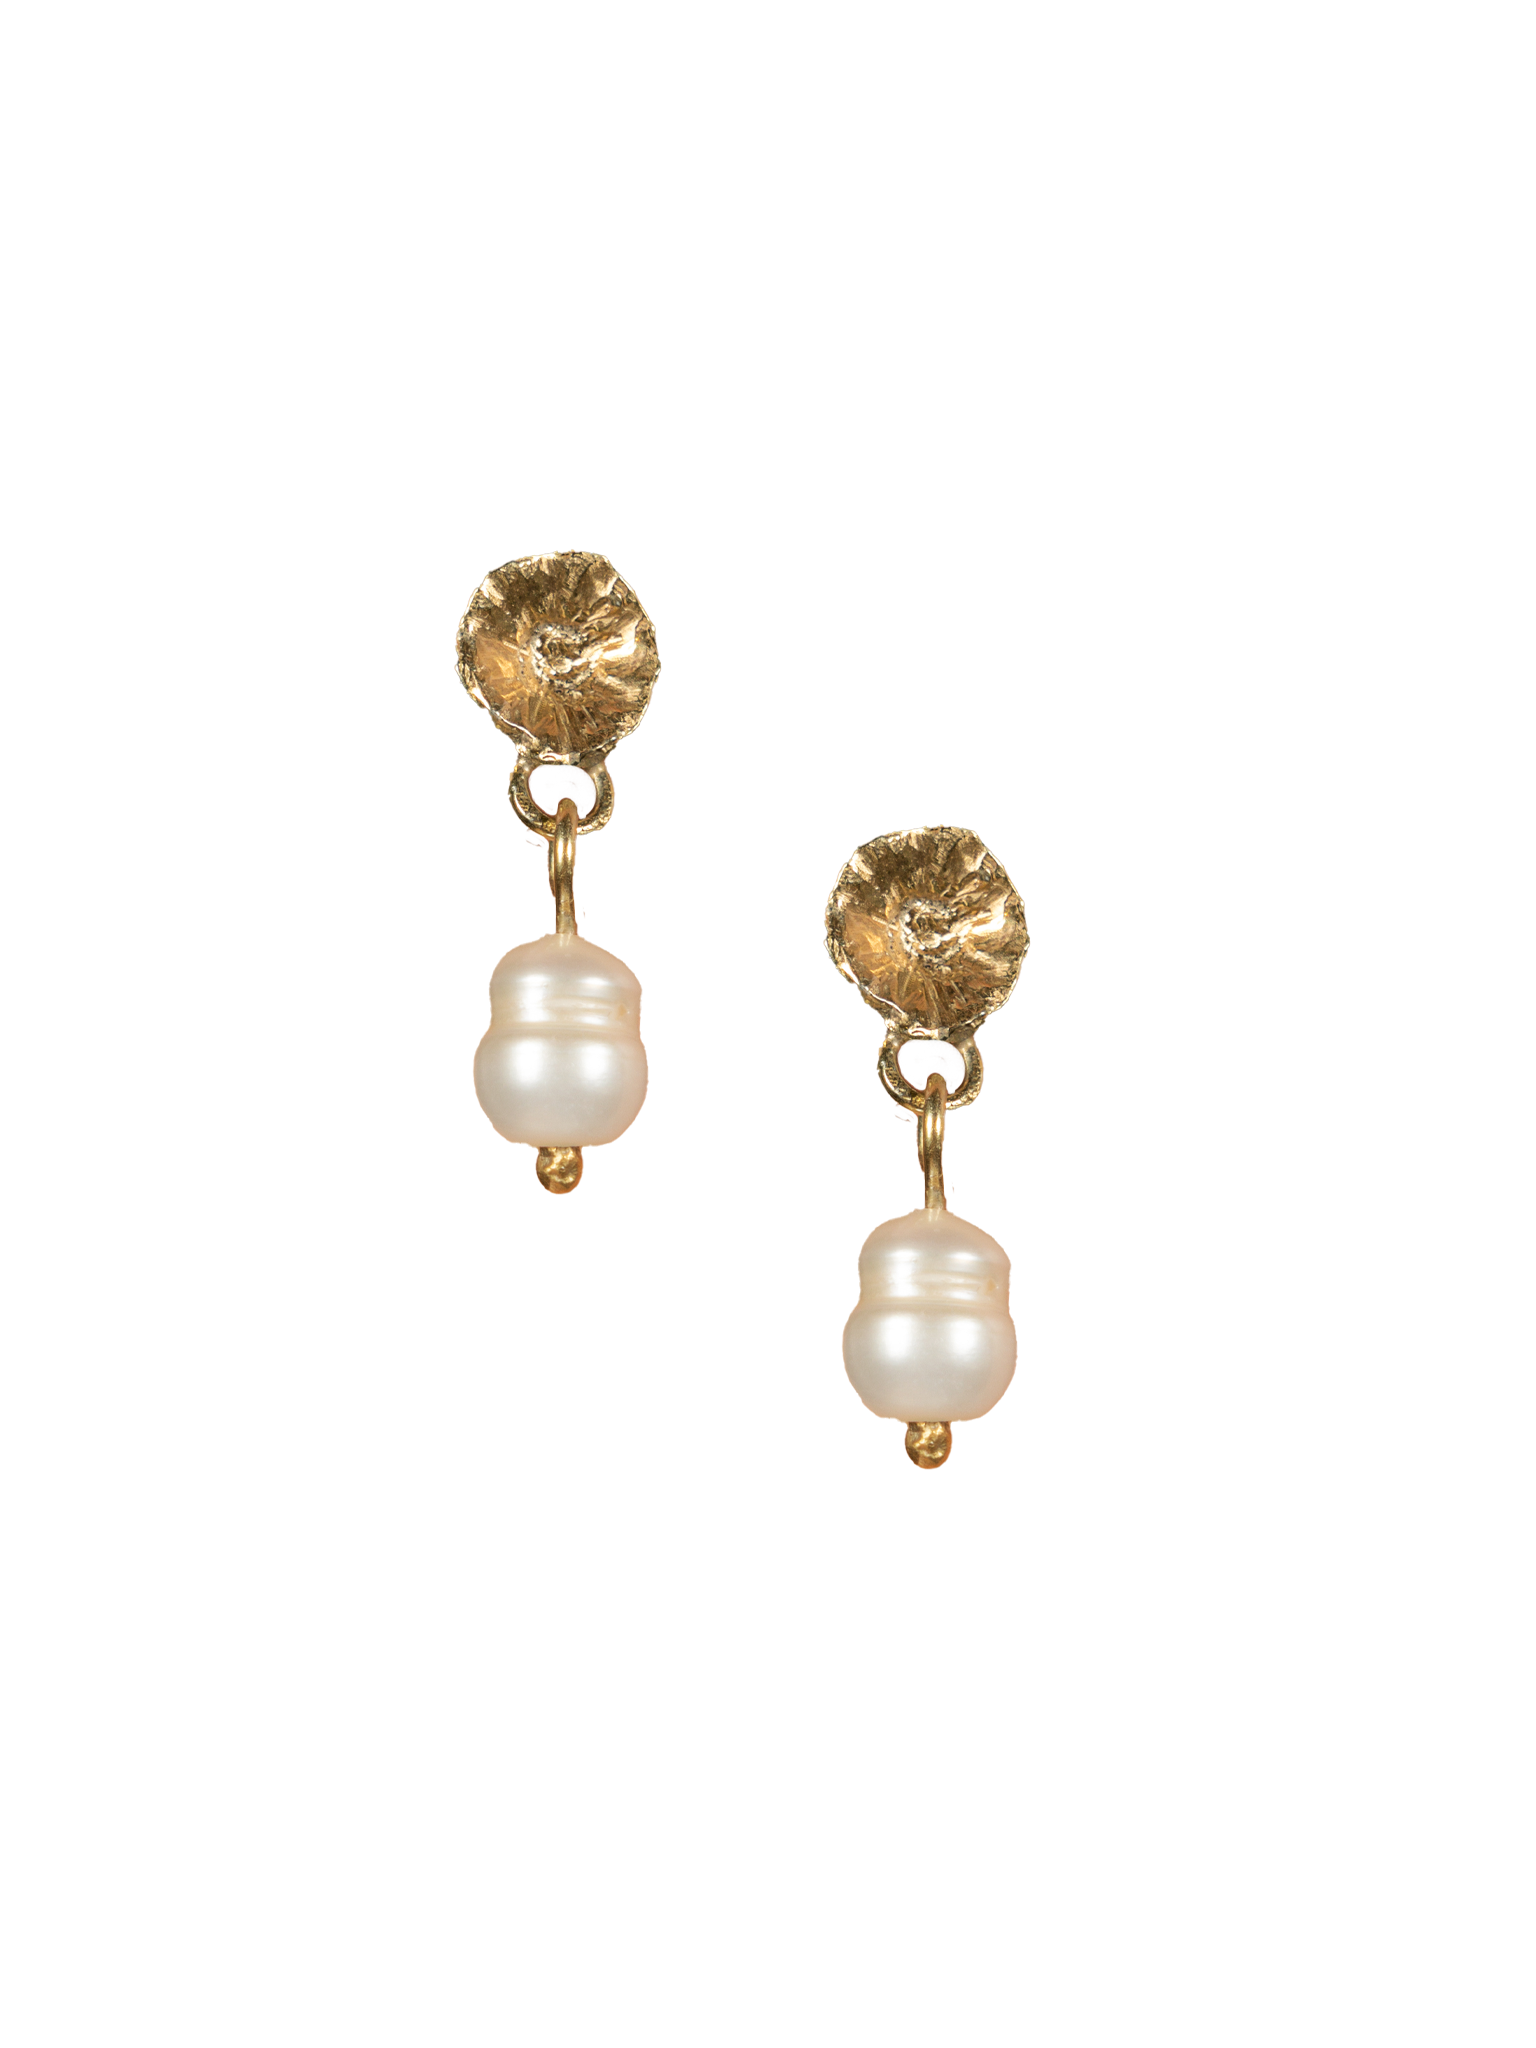 The forget me not pearl drop earrings